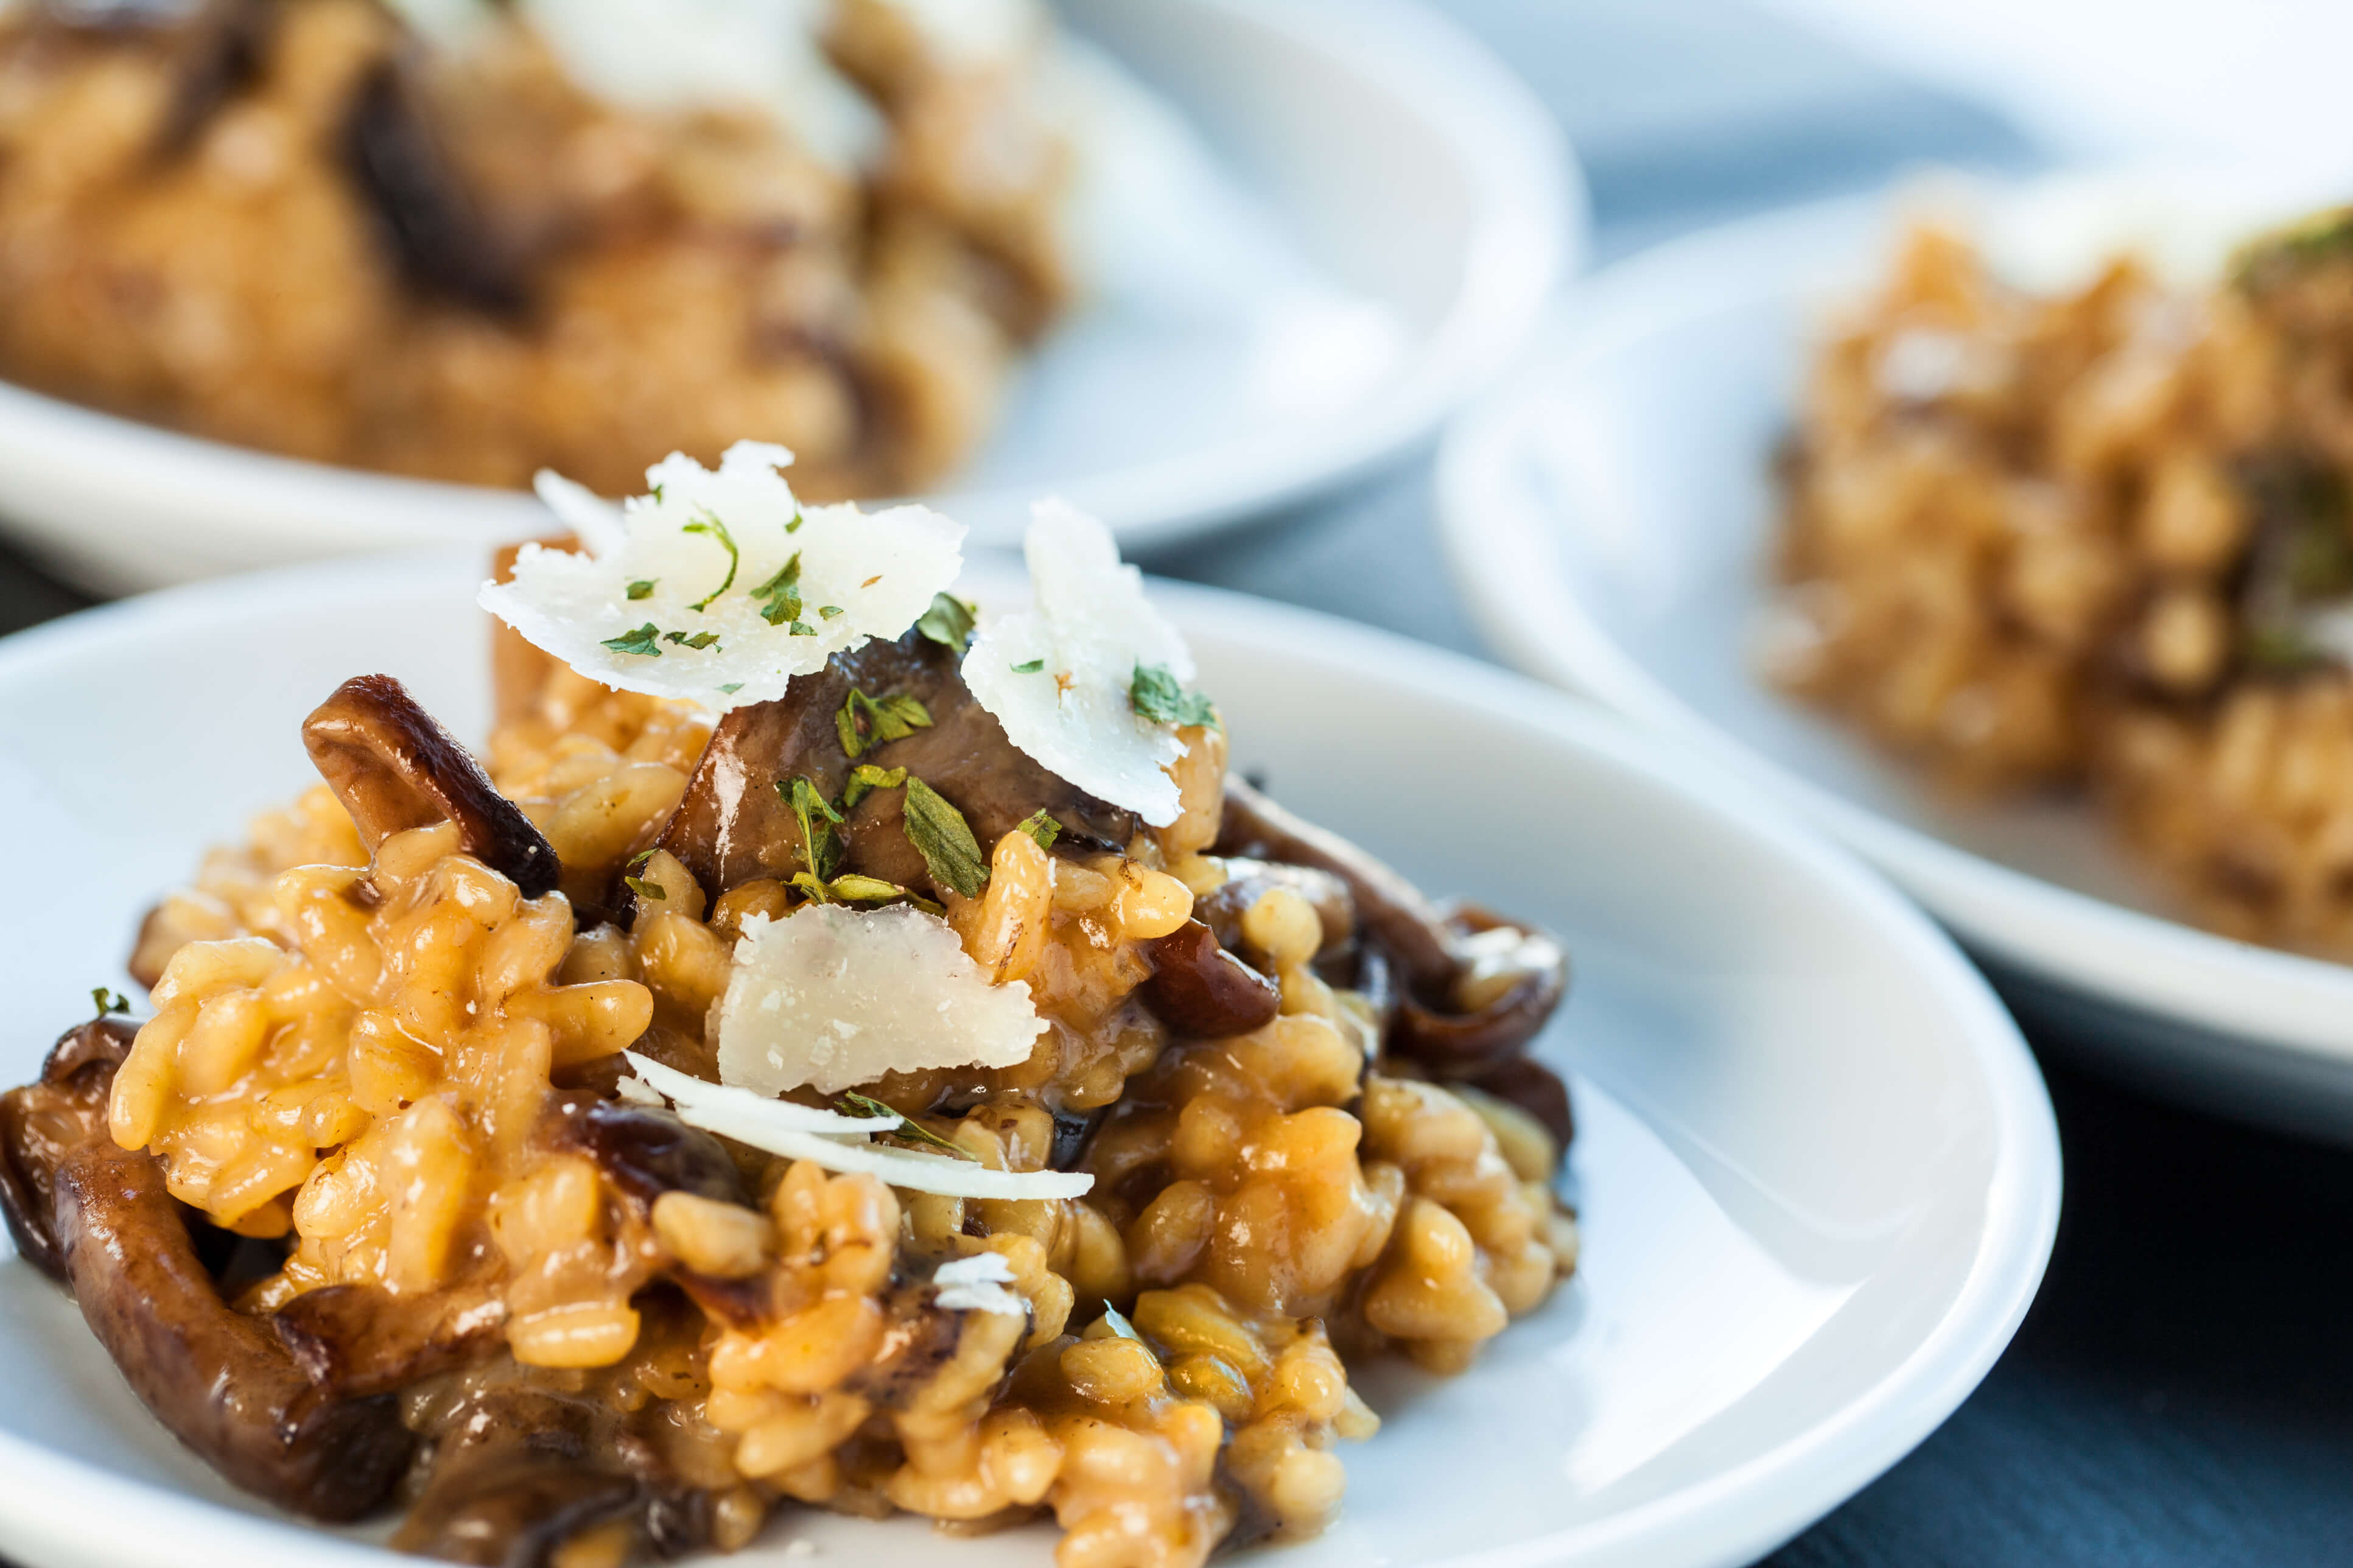 Cooking classic risotto can be a hands-on process that lasts over an hour.